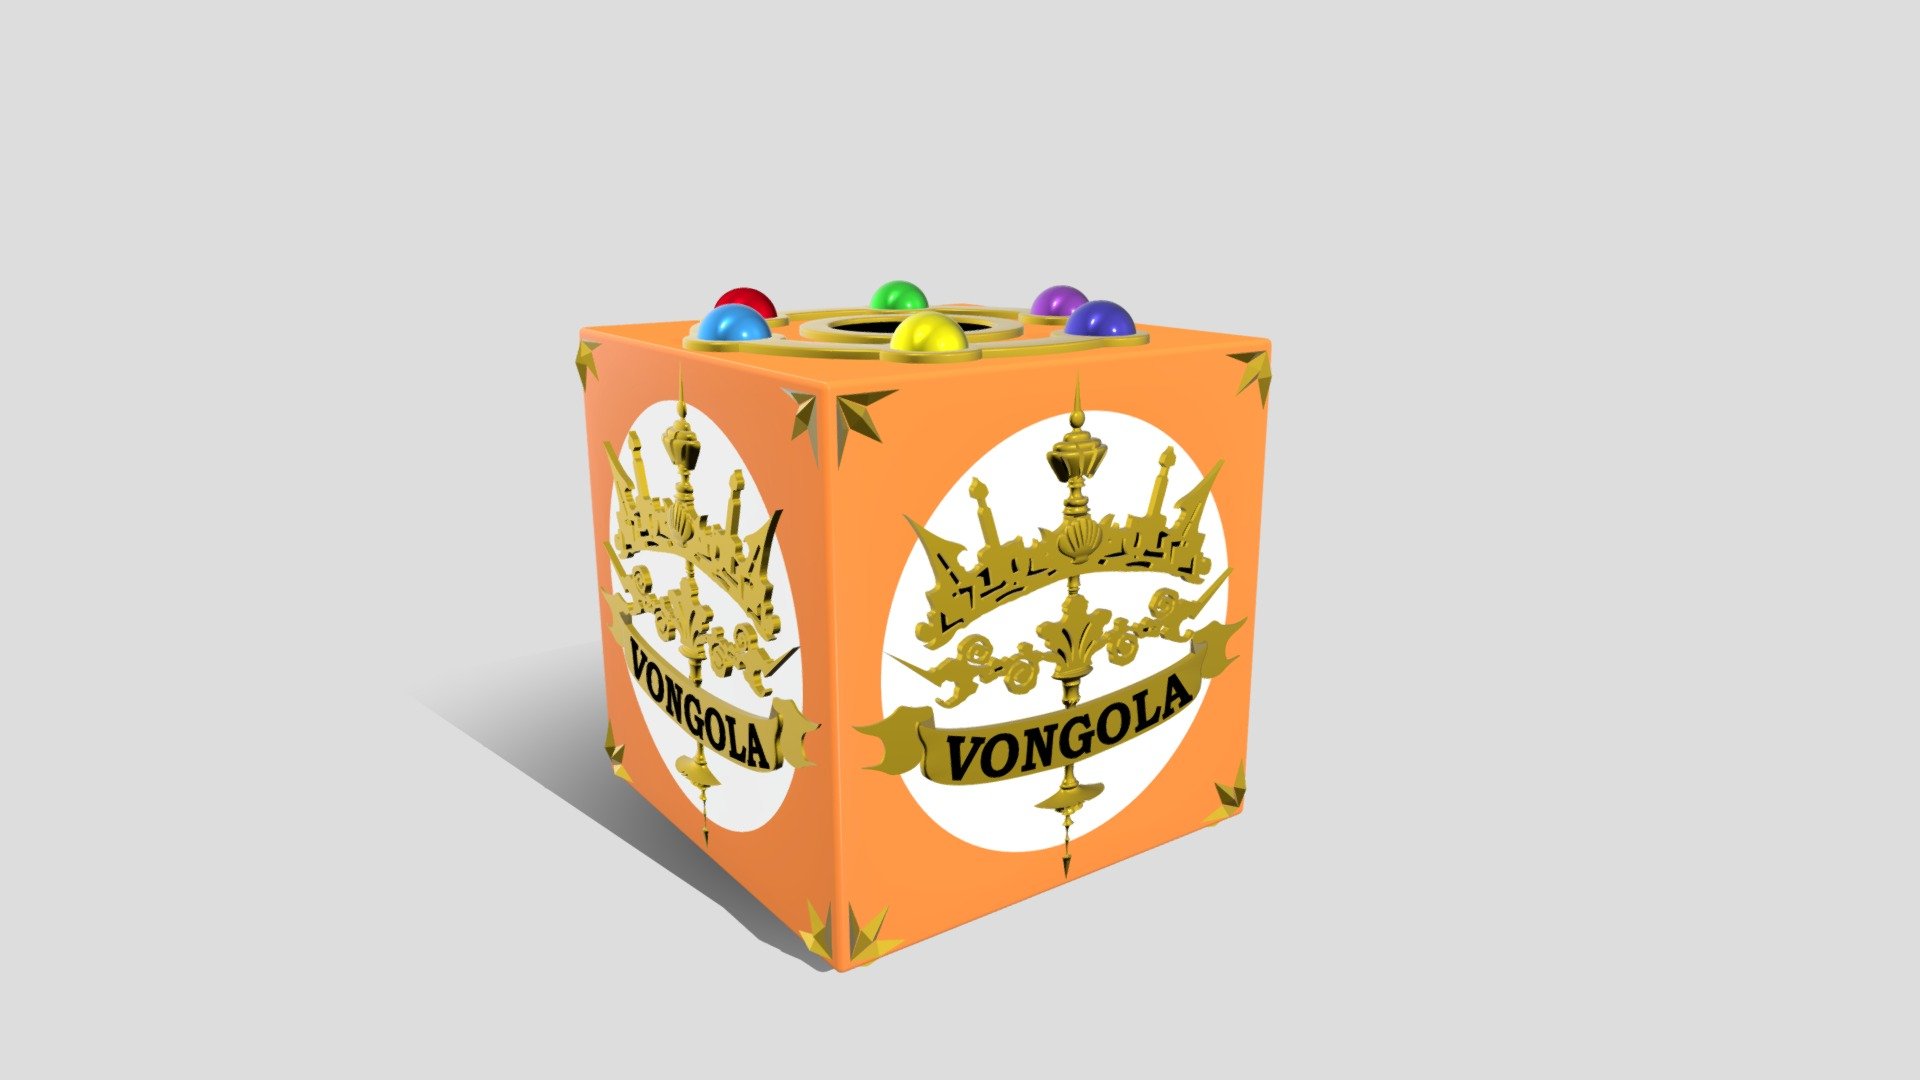 Since I upload on Deviantart my version of the Sky Vongola Box on Oct 6, 2014 I decided to make it 3D. I hope you like my work. I will start uploading more than 50 props designs that I did back then 3d model